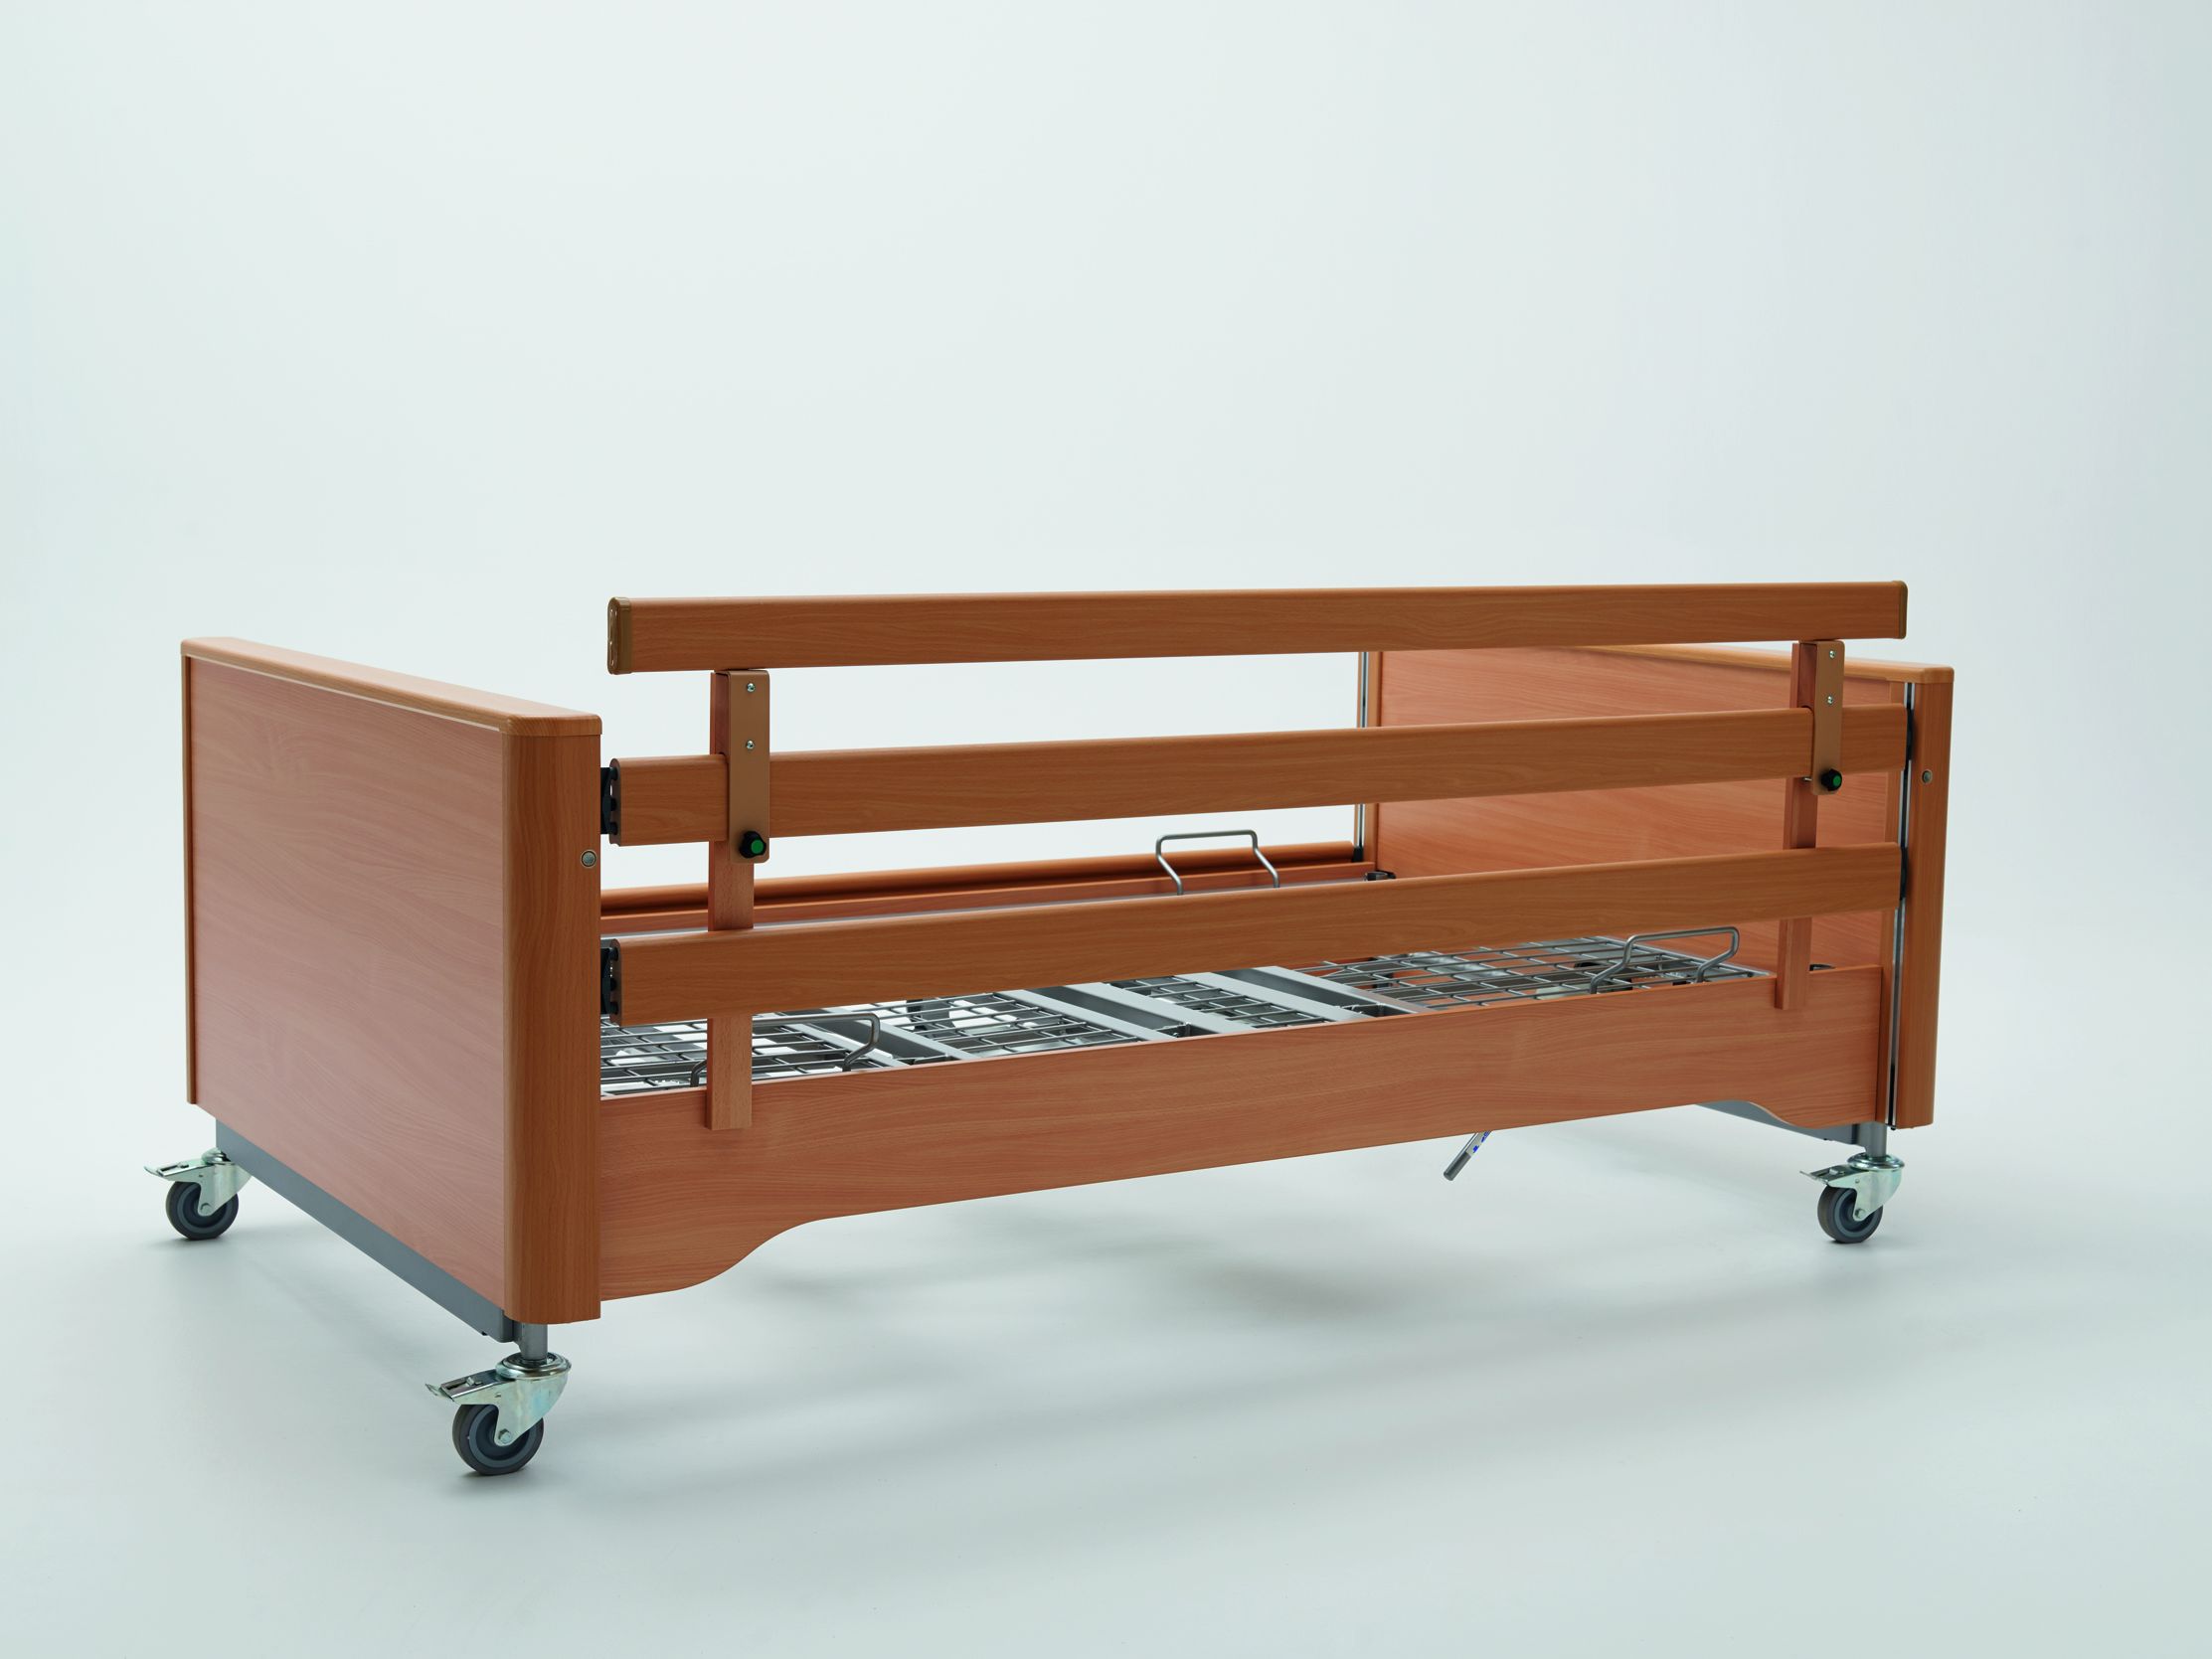 Clamp-on safety side bar available as an accessory for Gigant heavy-duty bed